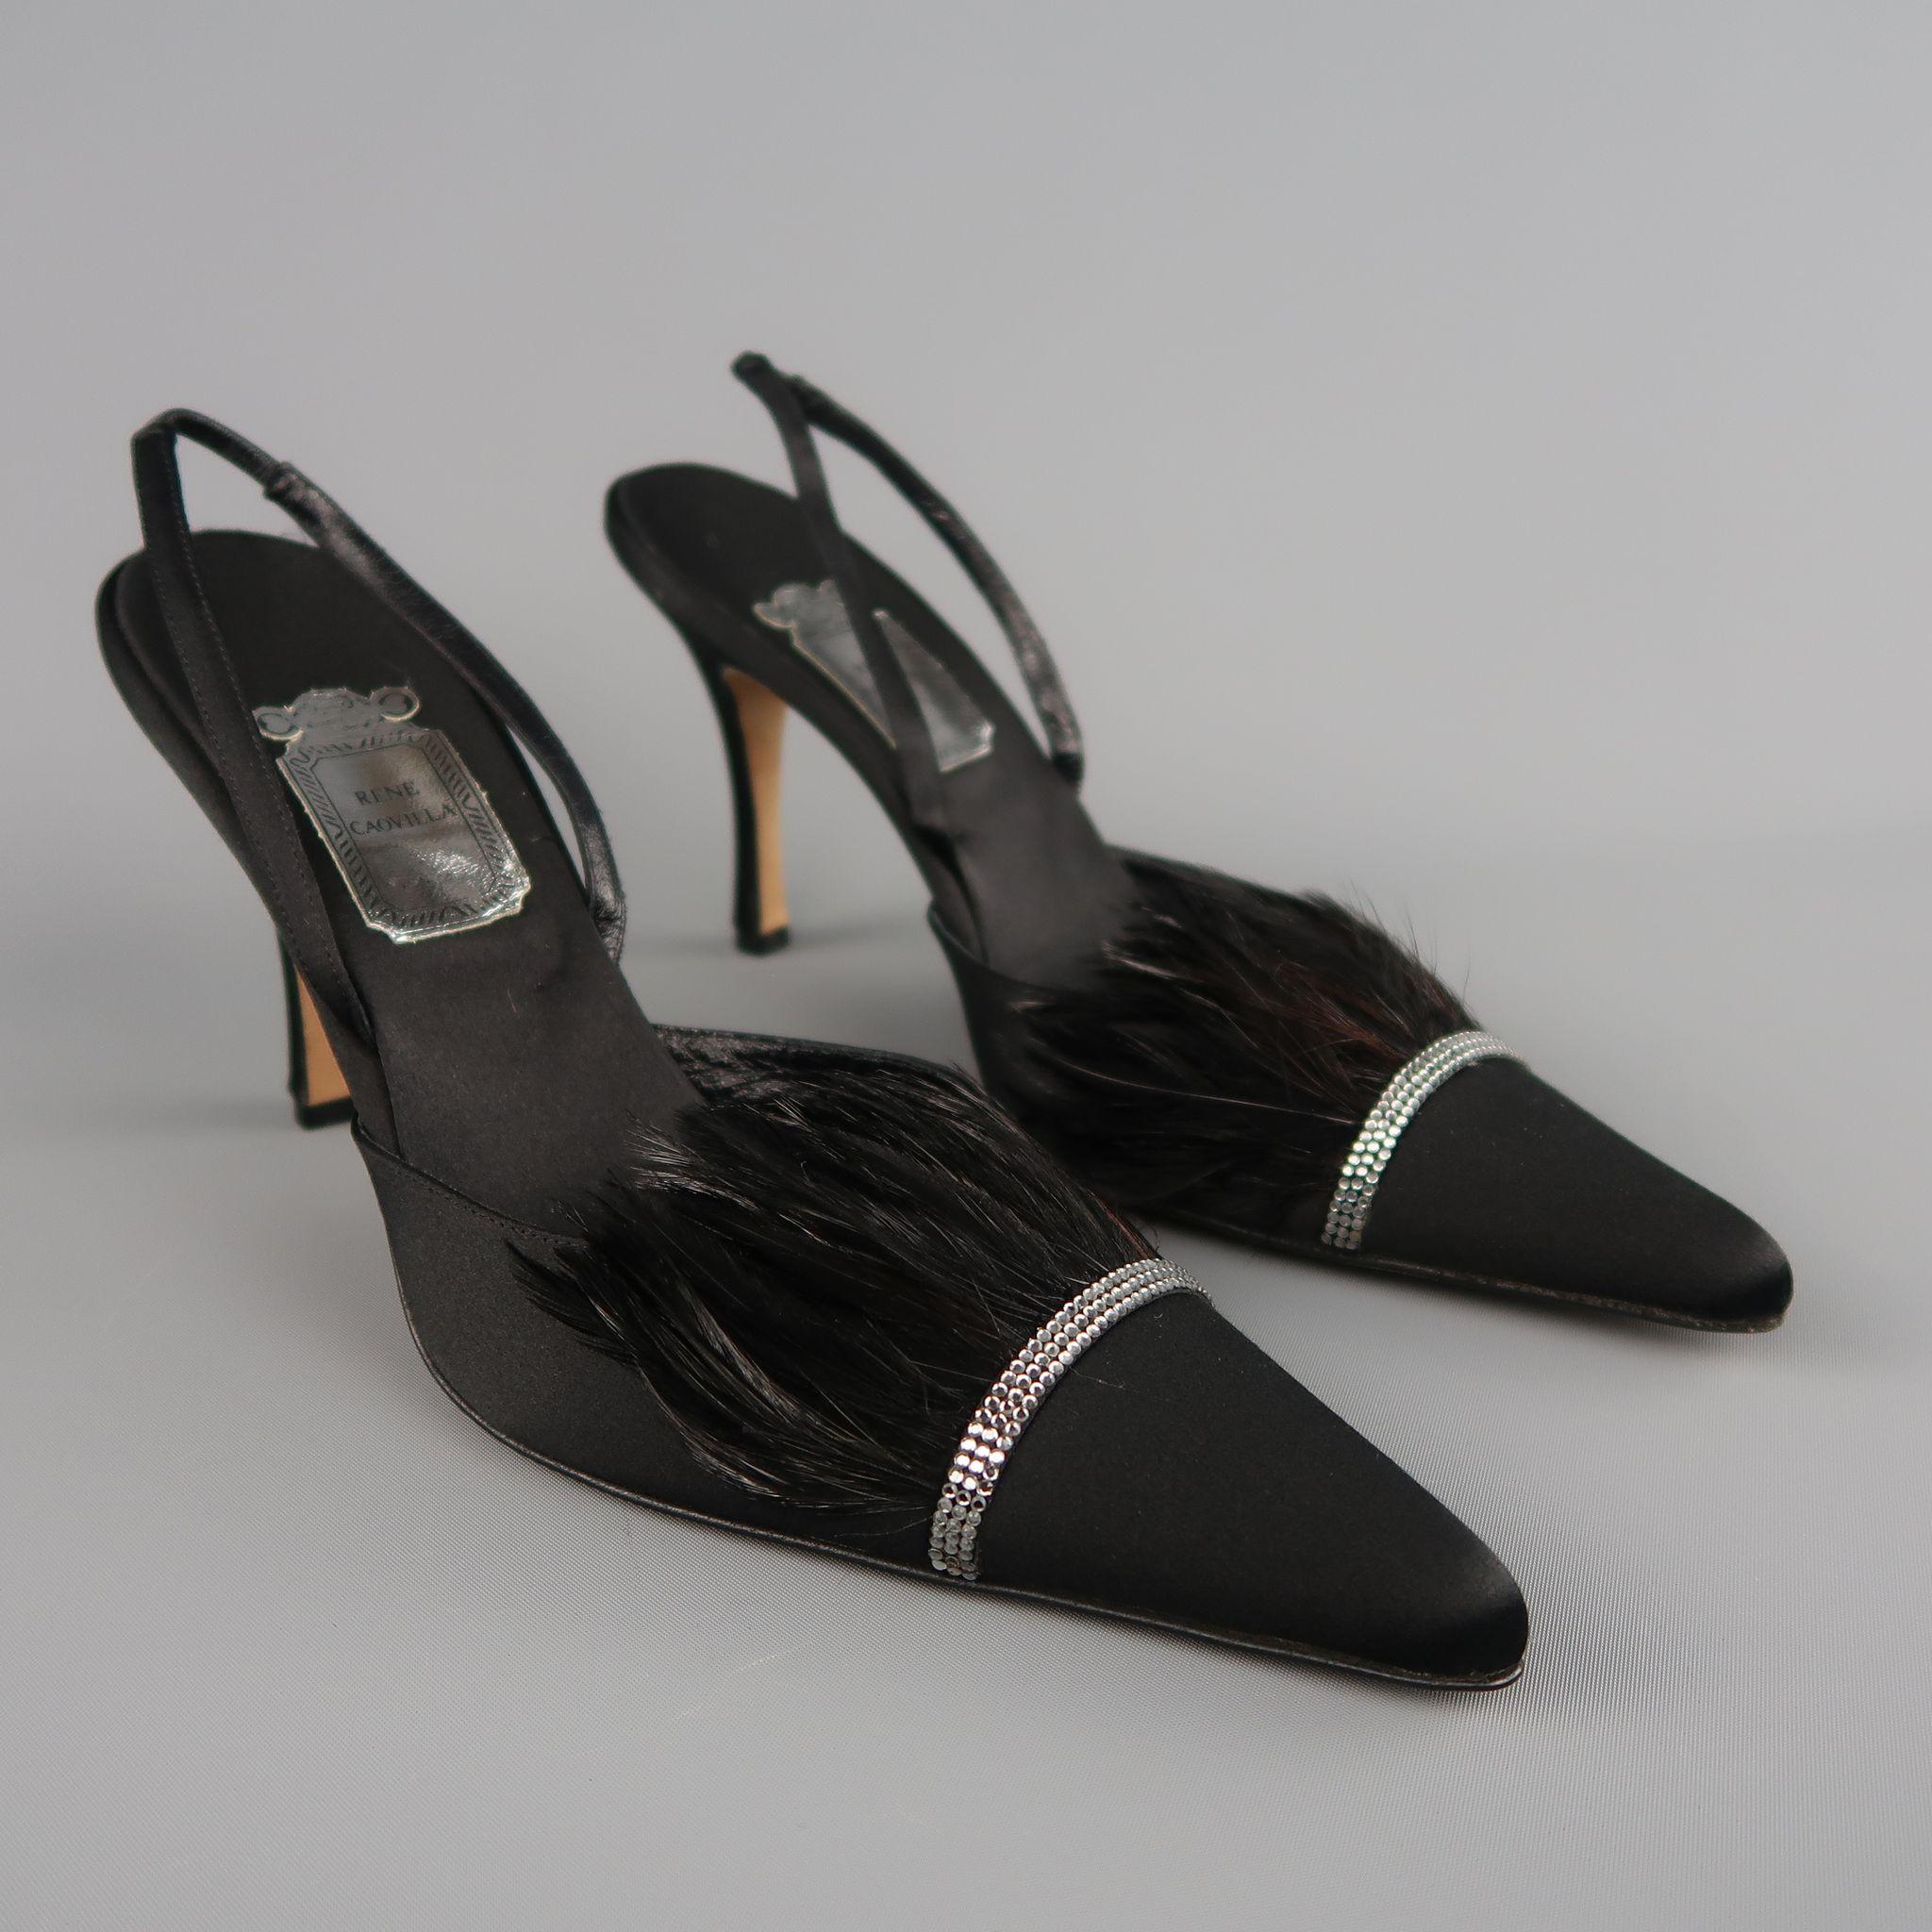 These fabulous evening pumps by RENE CAOVILLA slingback pumps come in black silk satin and feature a pointed toe with rhinestone and feather trim embellishment with a covered stiletto heel. Never worn. Made in Italy.  Retailed at $1195
 
New without